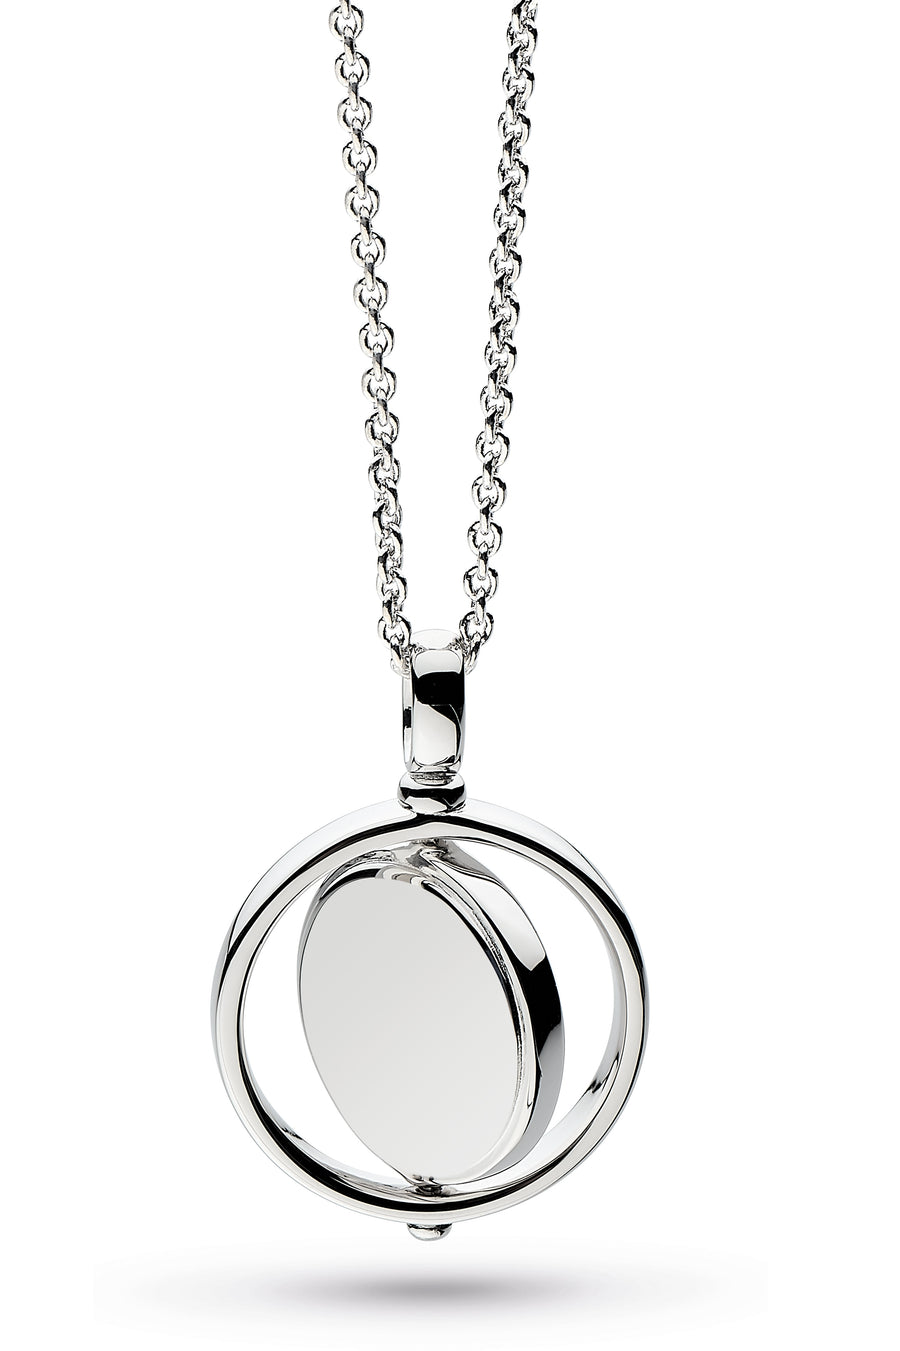 Empire Revival Round Spinner Necklace - 90385rp029